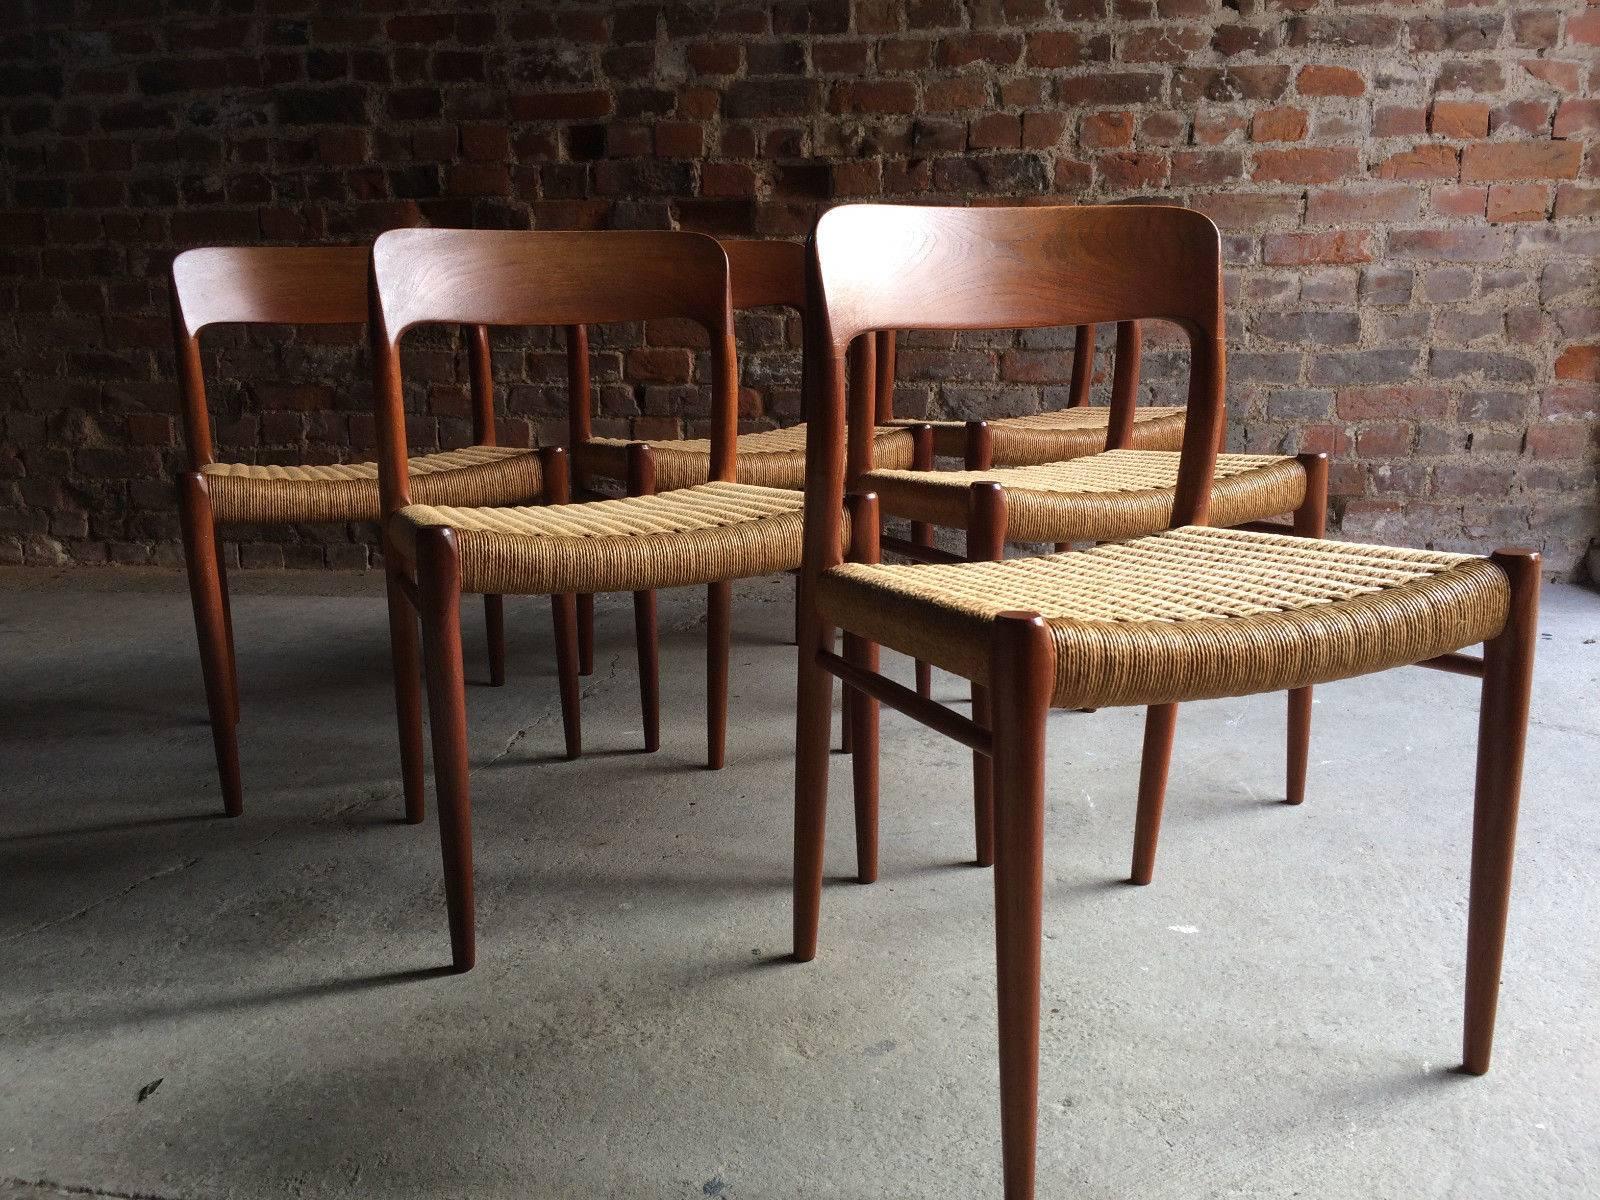 A magnificent set of six model 75 chairs by Danish designer Niels Otto Møller, and manufactured by JL Møller Møbelfabrik chair featuring frames made of solid teak and seating made of paper cord.